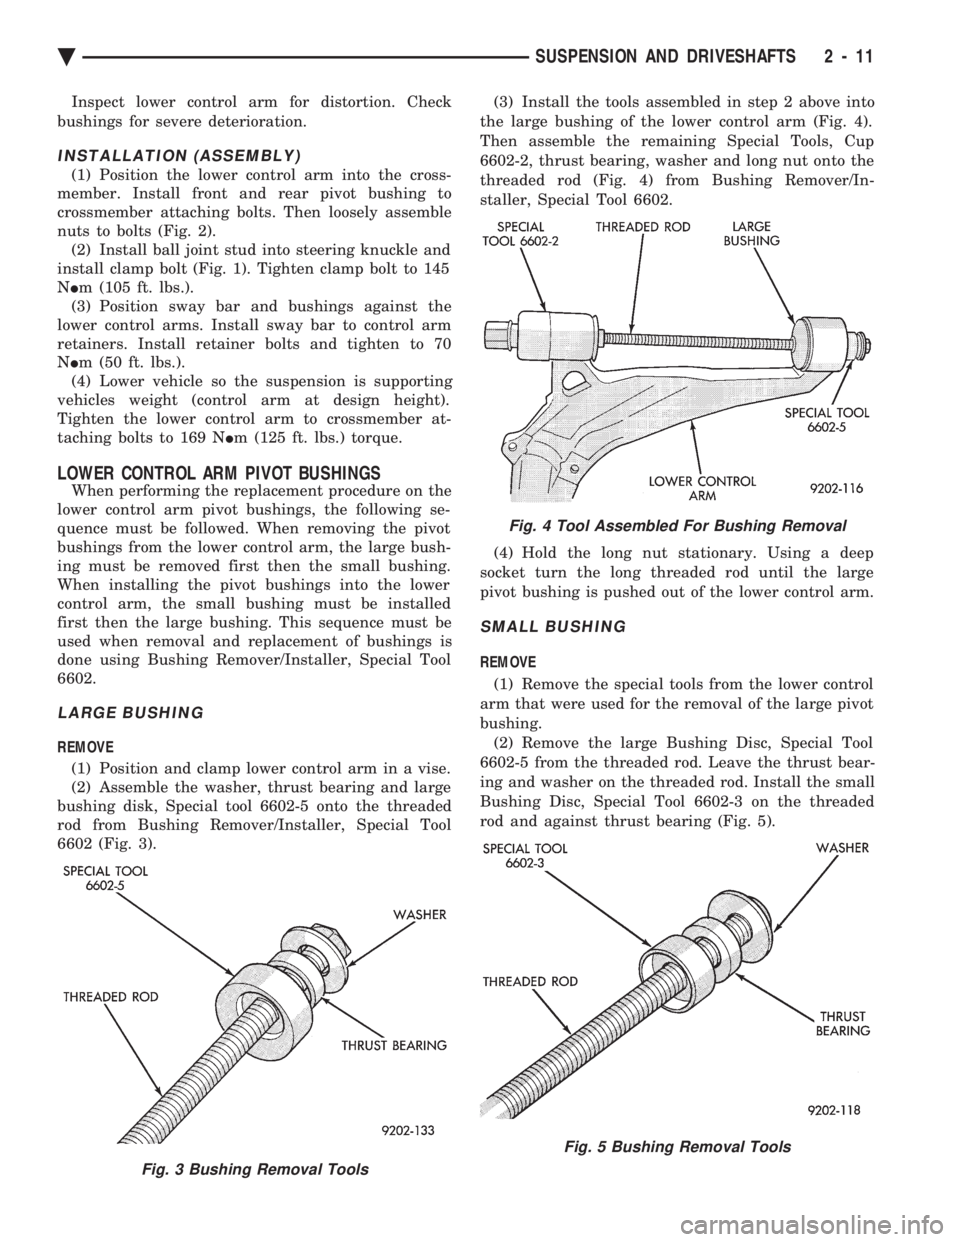 CHEVROLET PLYMOUTH ACCLAIM 1993  Service Manual Inspect lower control arm for distortion. Check 
bushings for severe deterioration.
INSTALLATION (ASSEMBLY)
(1) Position the lower control arm into the cross- 
member. Install front and rear pivot bus